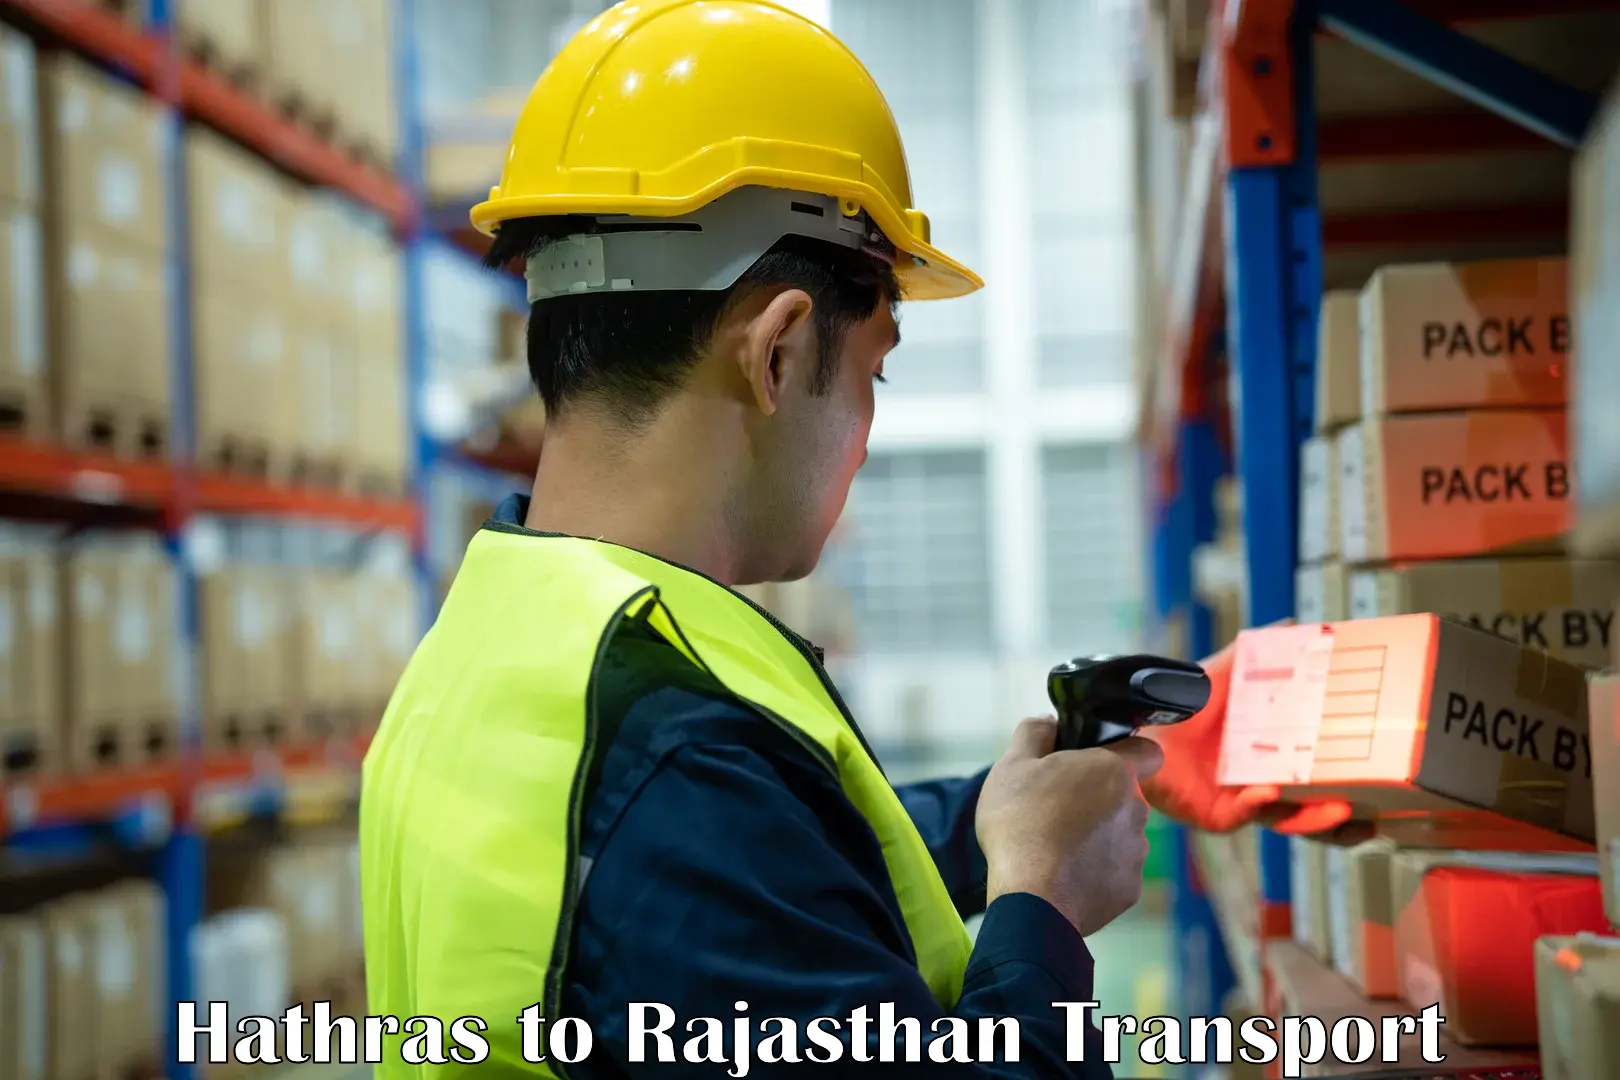 Shipping services Hathras to Rajasthan